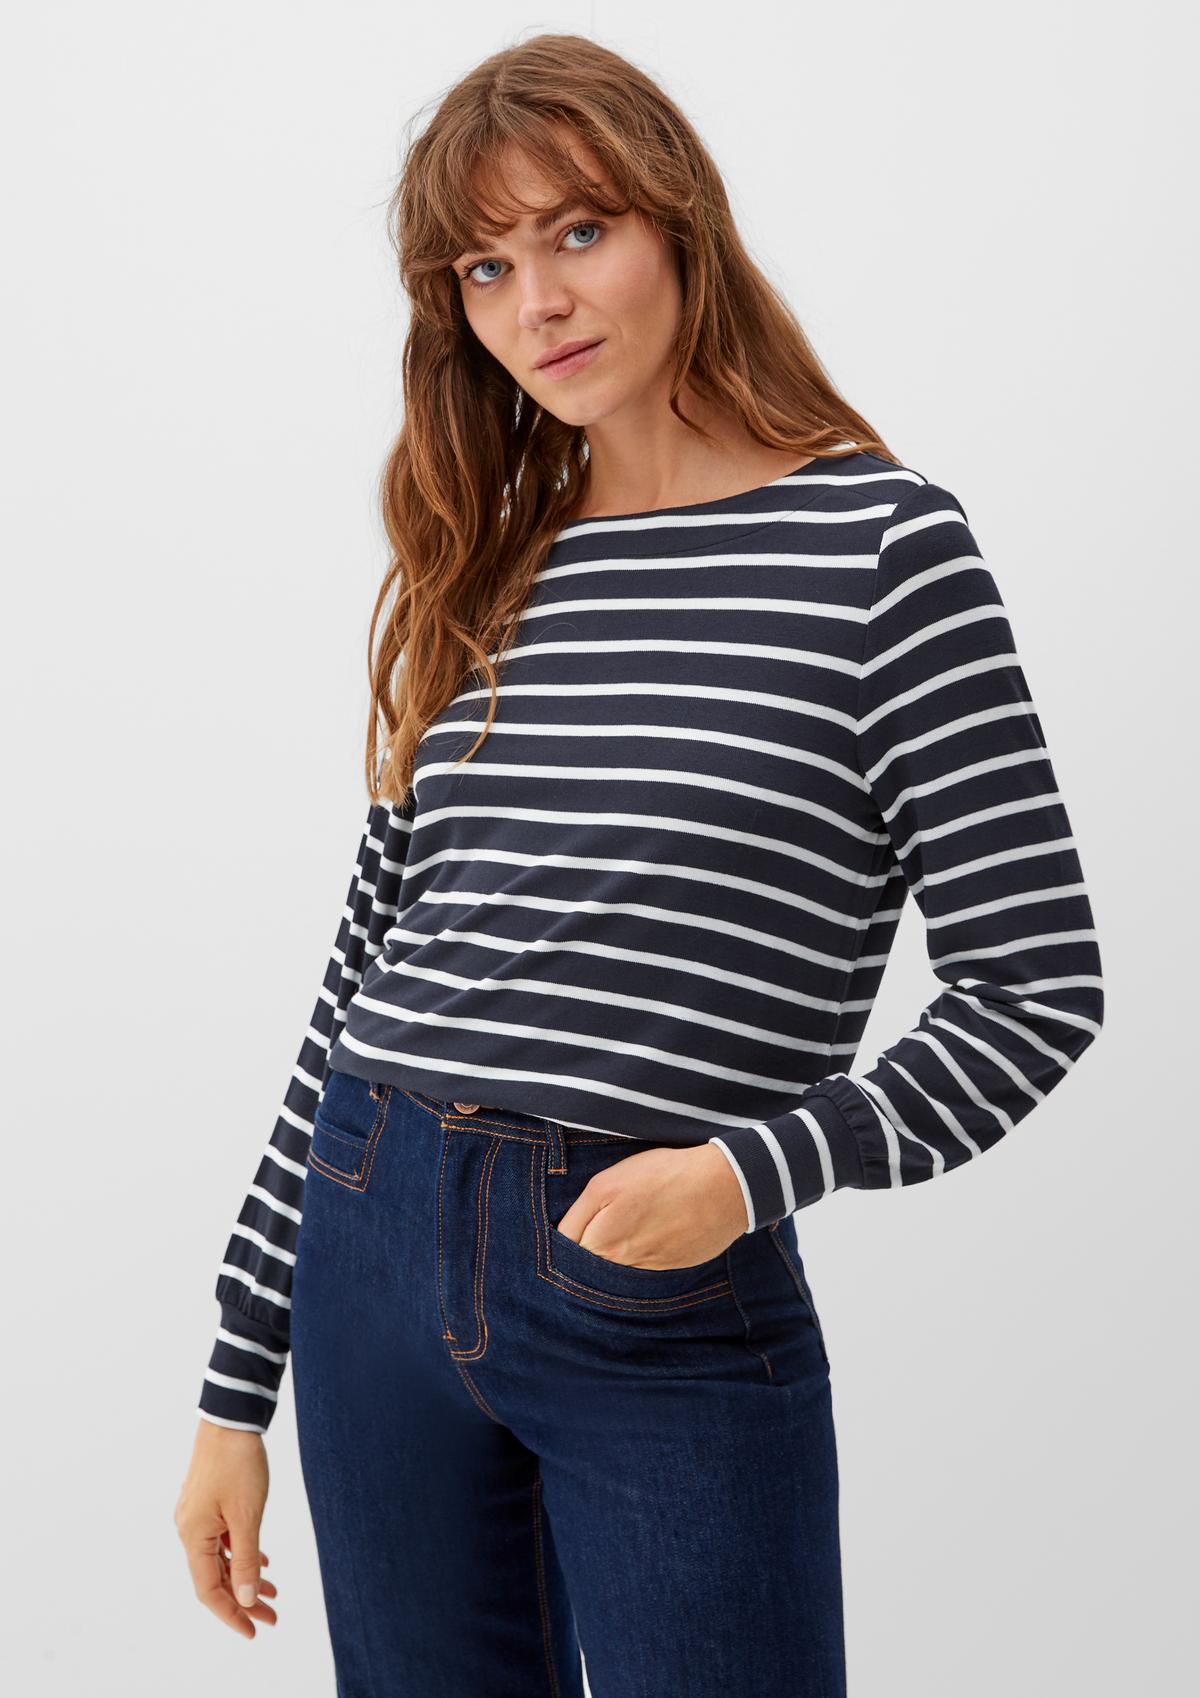 s.Oliver Knit jersey striped top